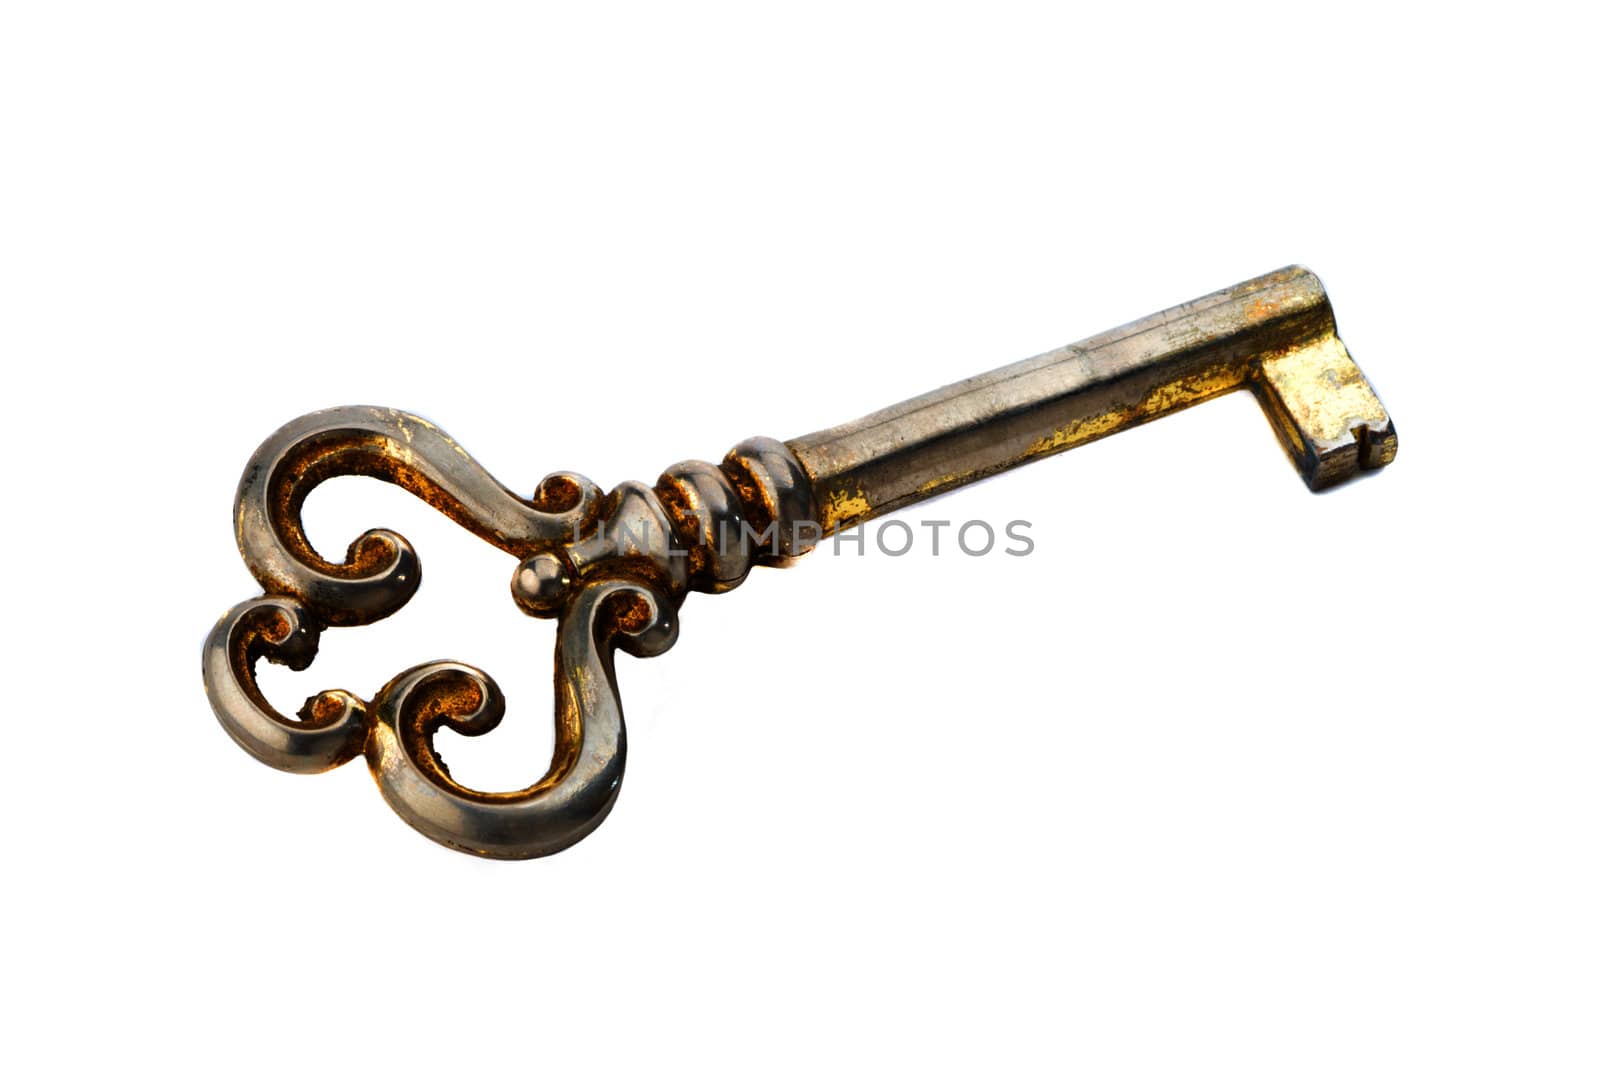 Antique yellow key on a white background in high resolution